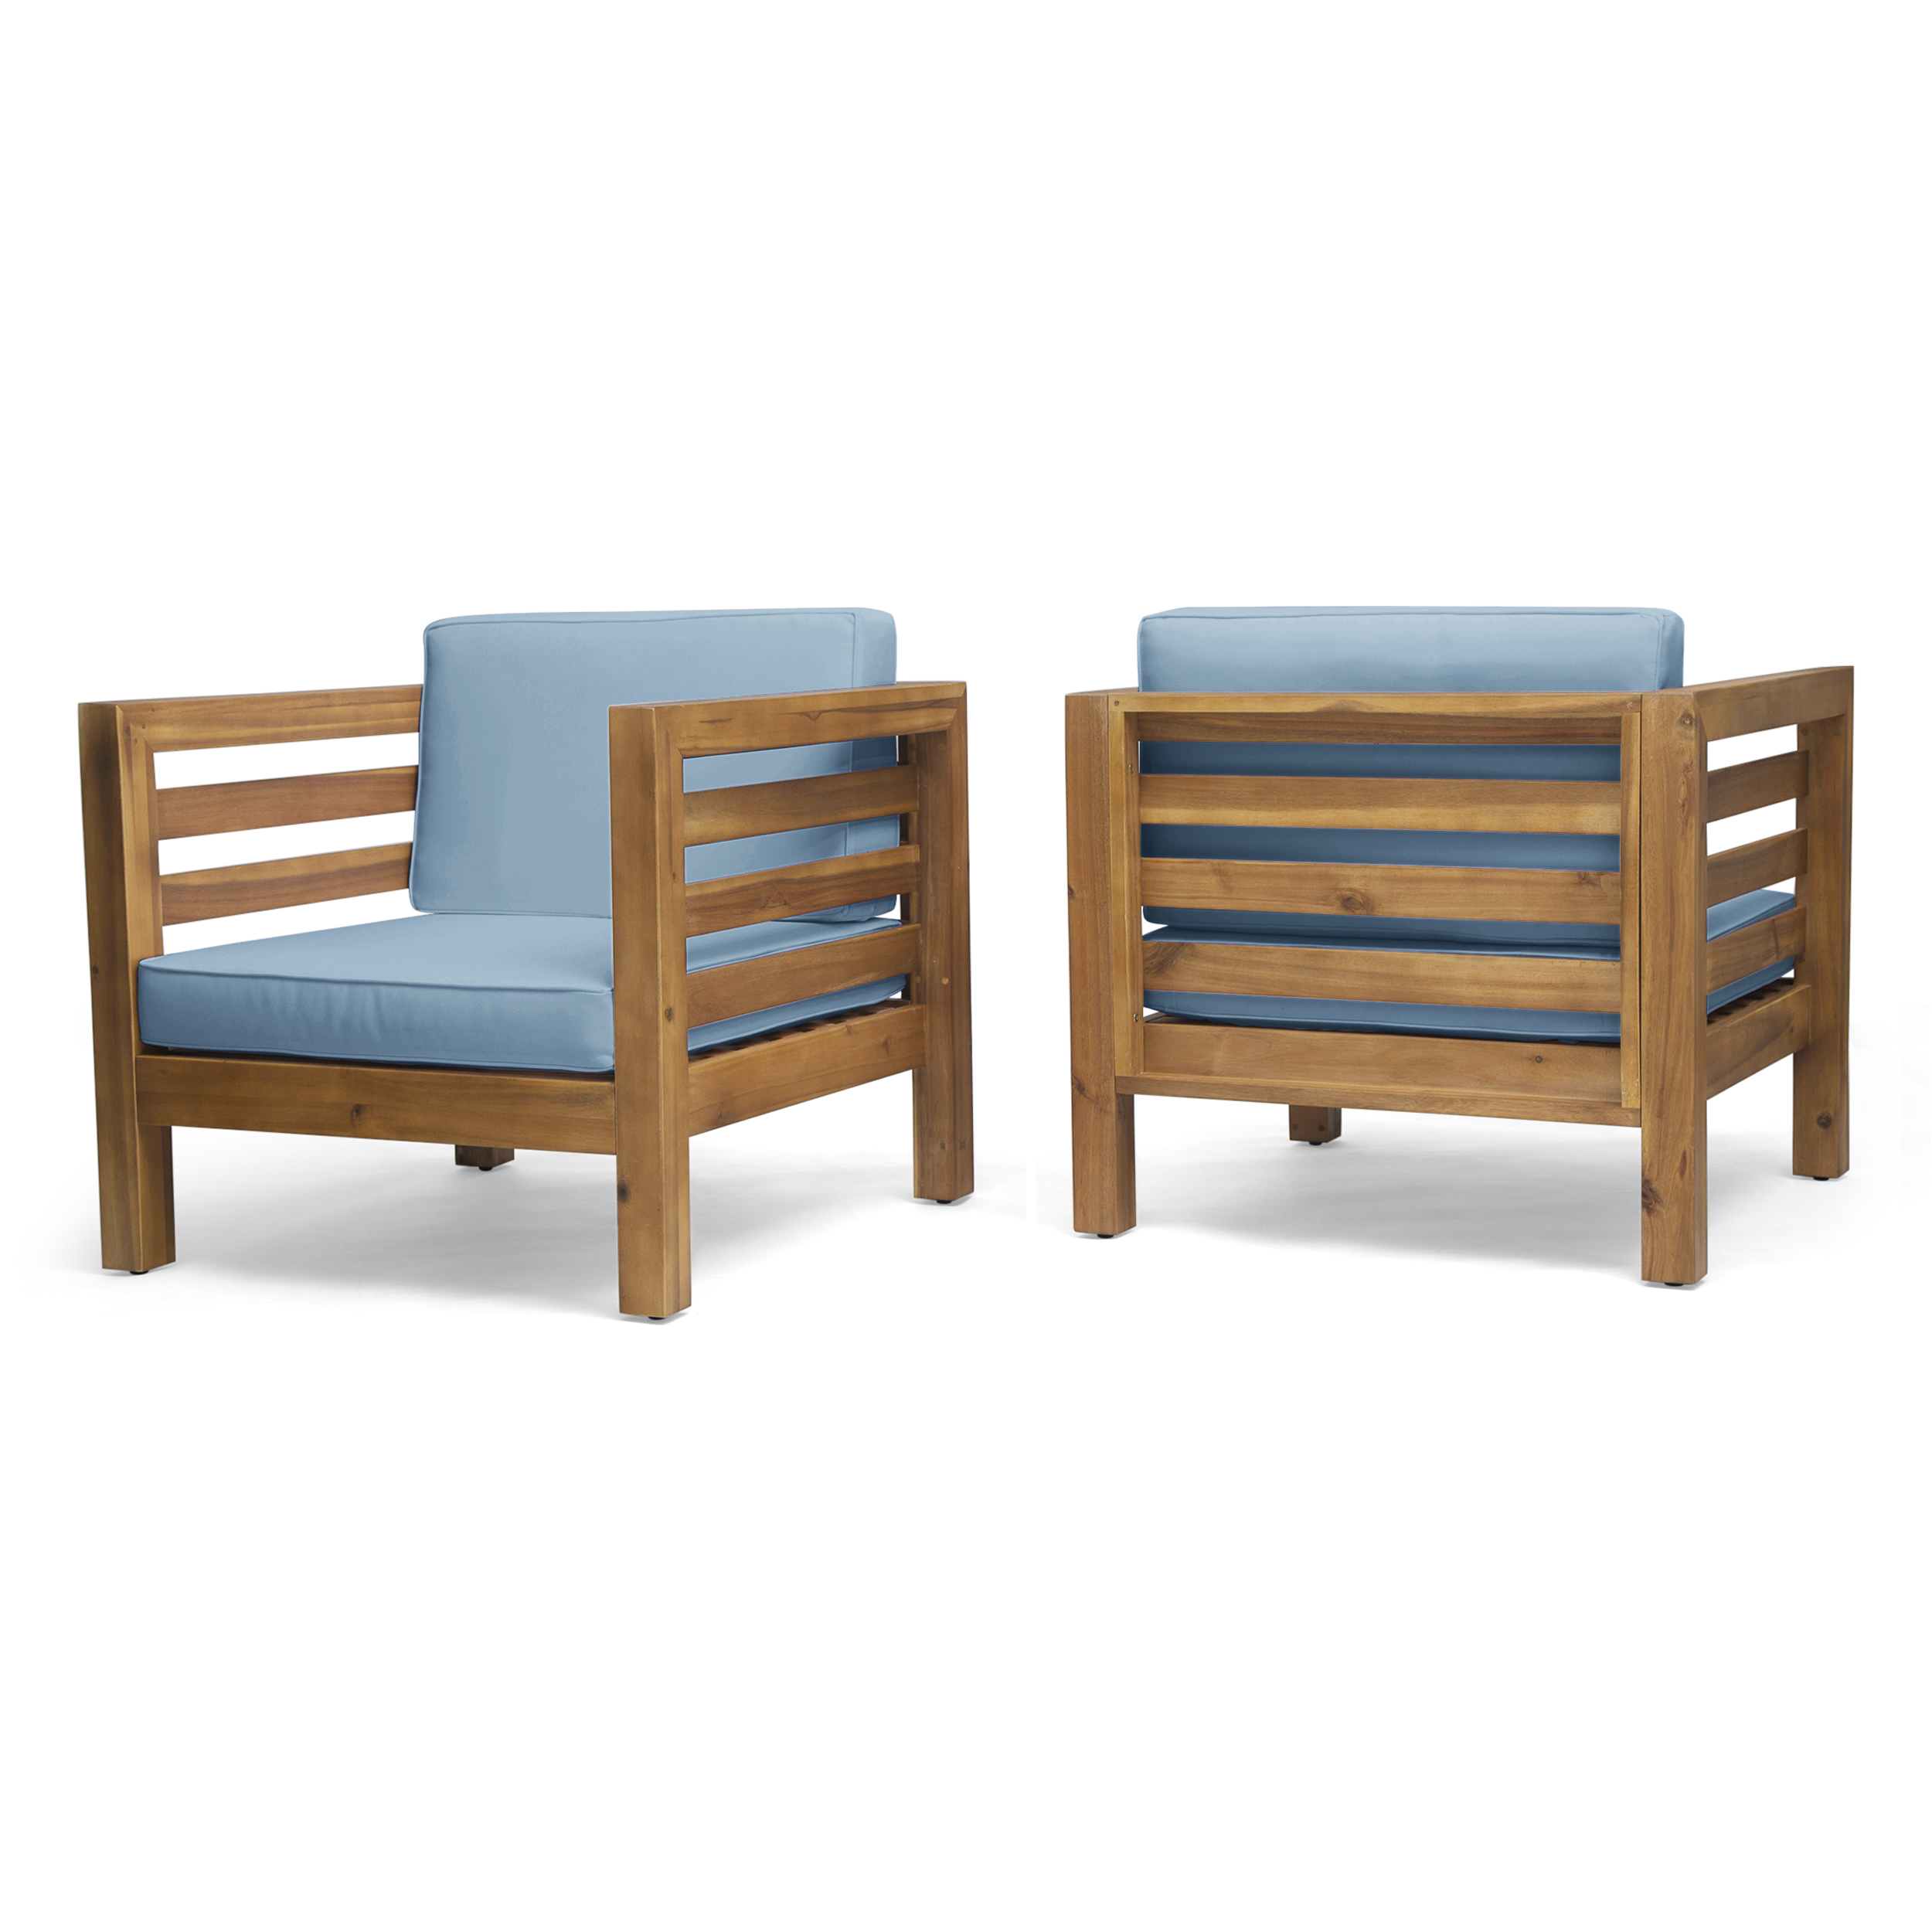 Louise Outdoor Acacia Wood Club Chairs with Cushions (Set of 2) - teak finish + blue